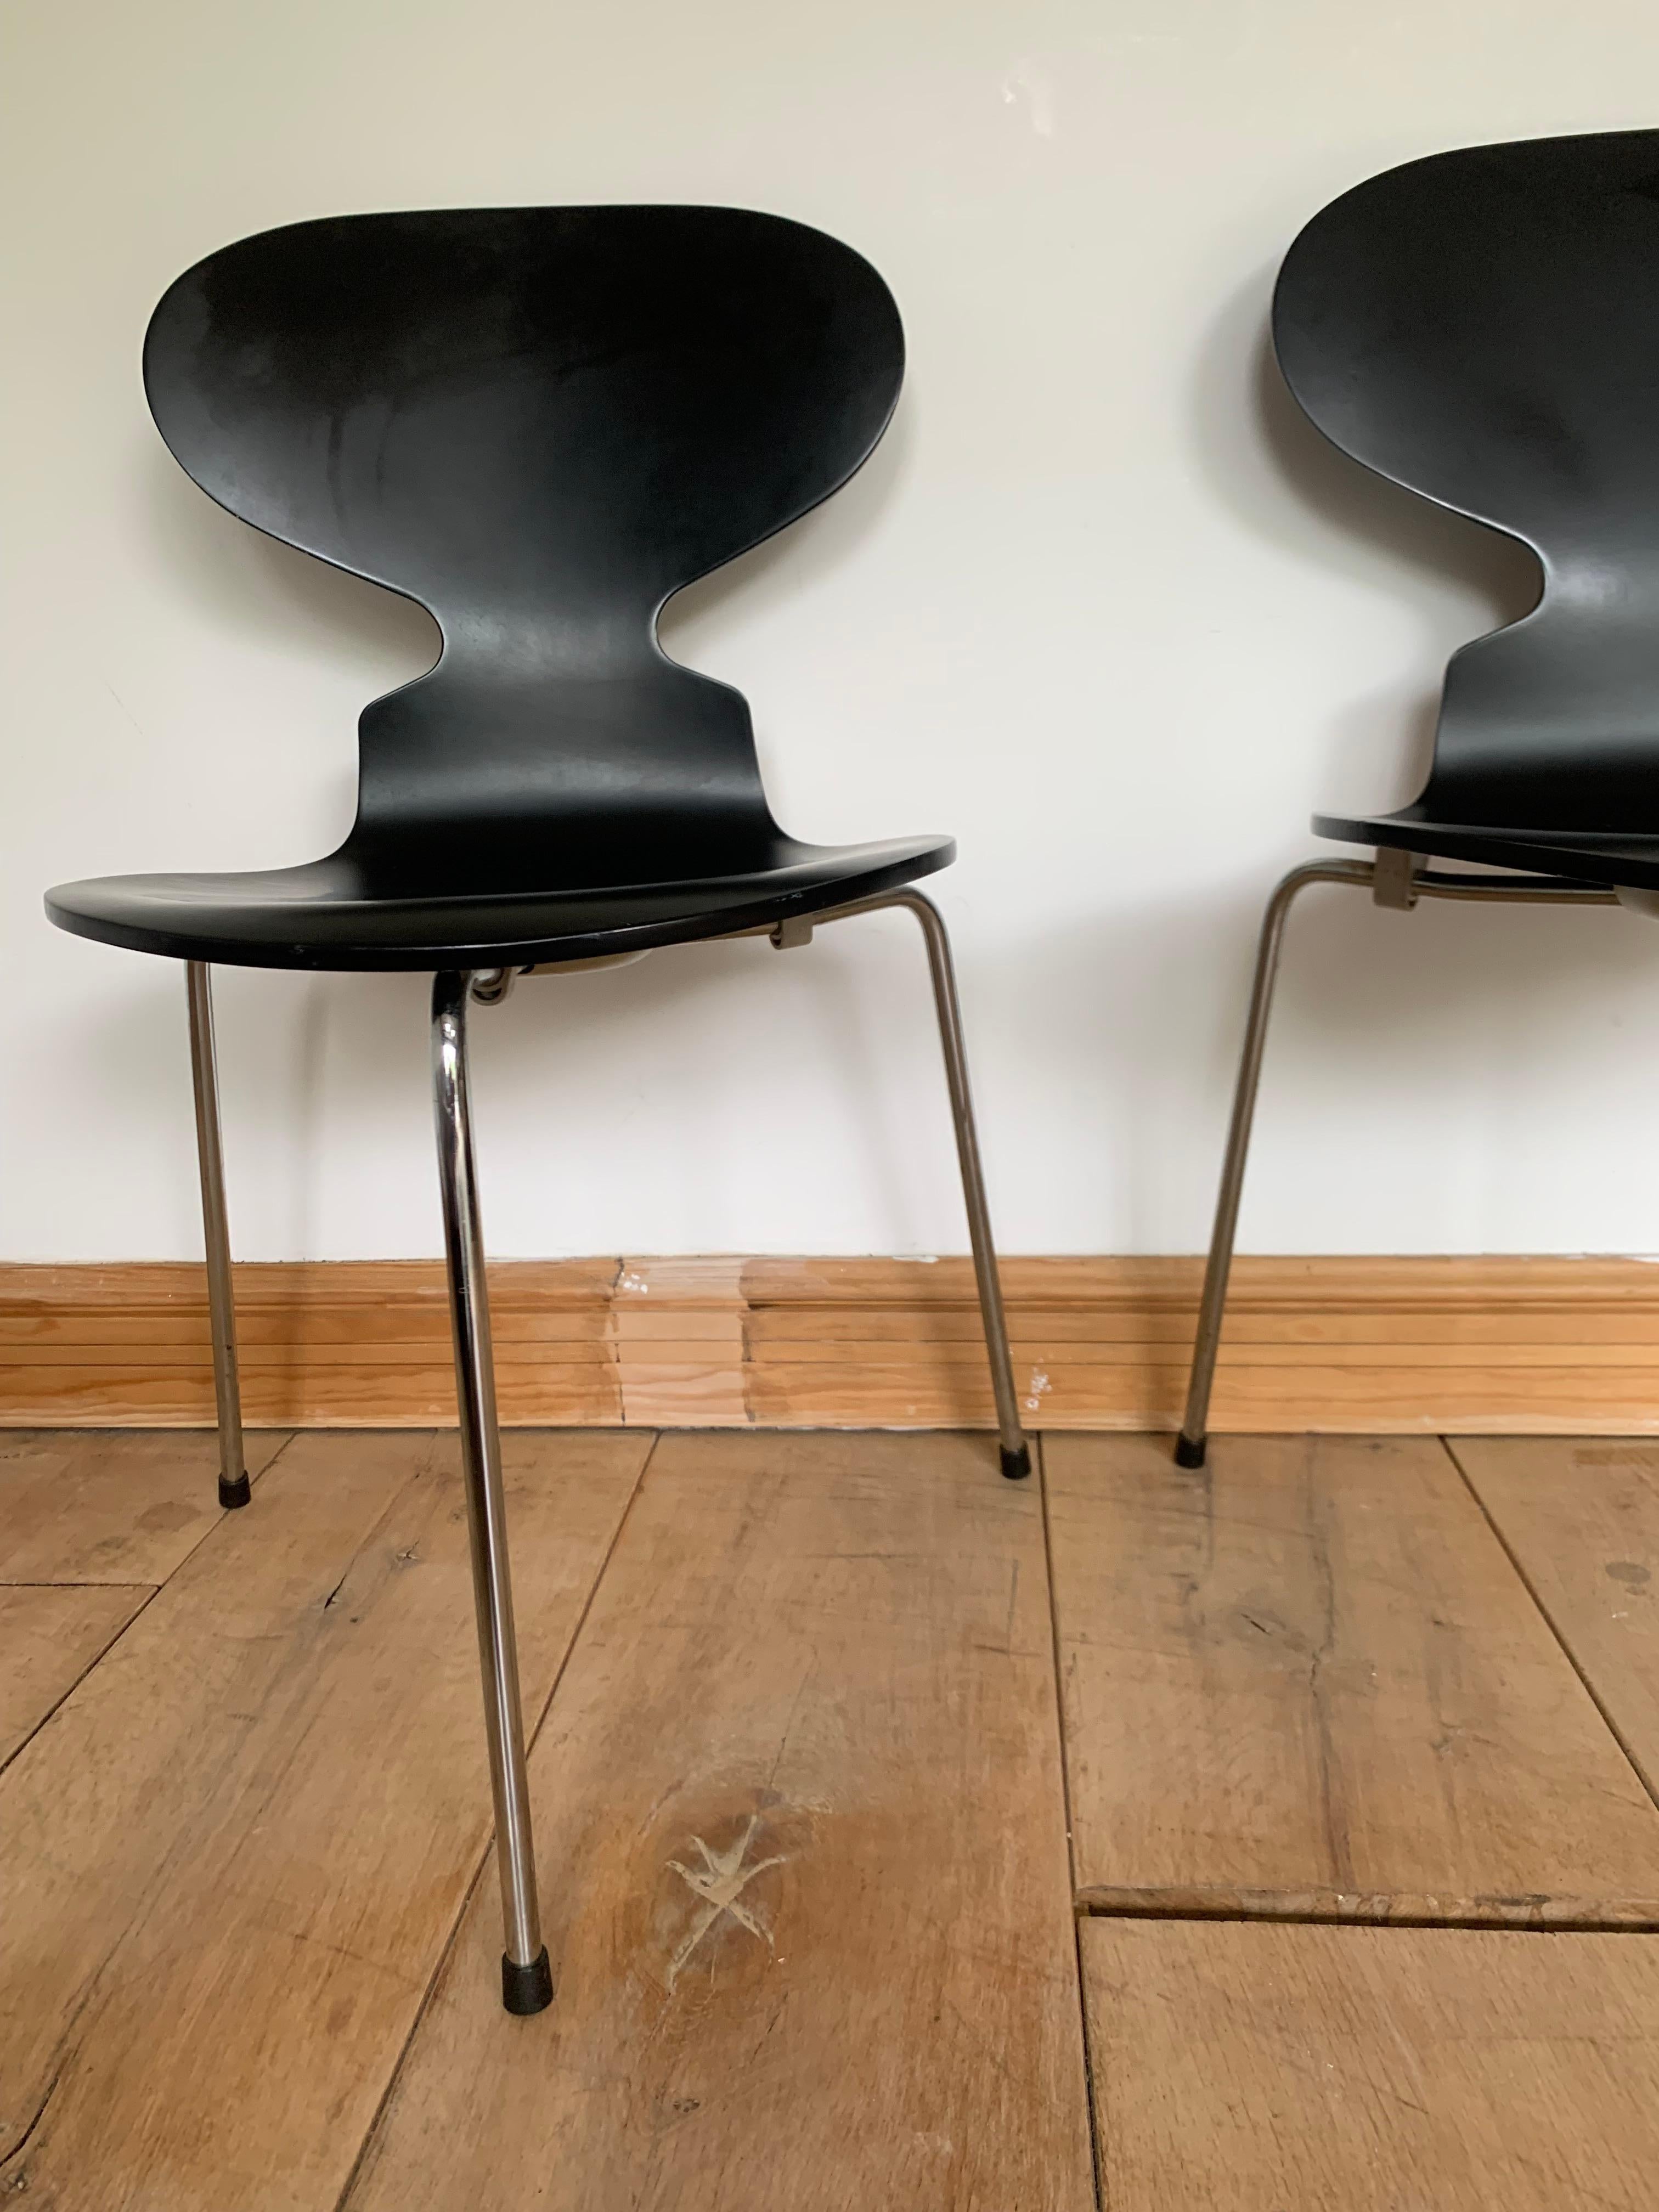 Original eye-catching Arne Jacobsen black three legged Ant chair.
The Ant chair is a classic of modern chair design. It was designed in 1952 by Arne Jacobsen for use in the canteen of the Danish pharmaceutical firm Novo Nordisk. The Ant was named